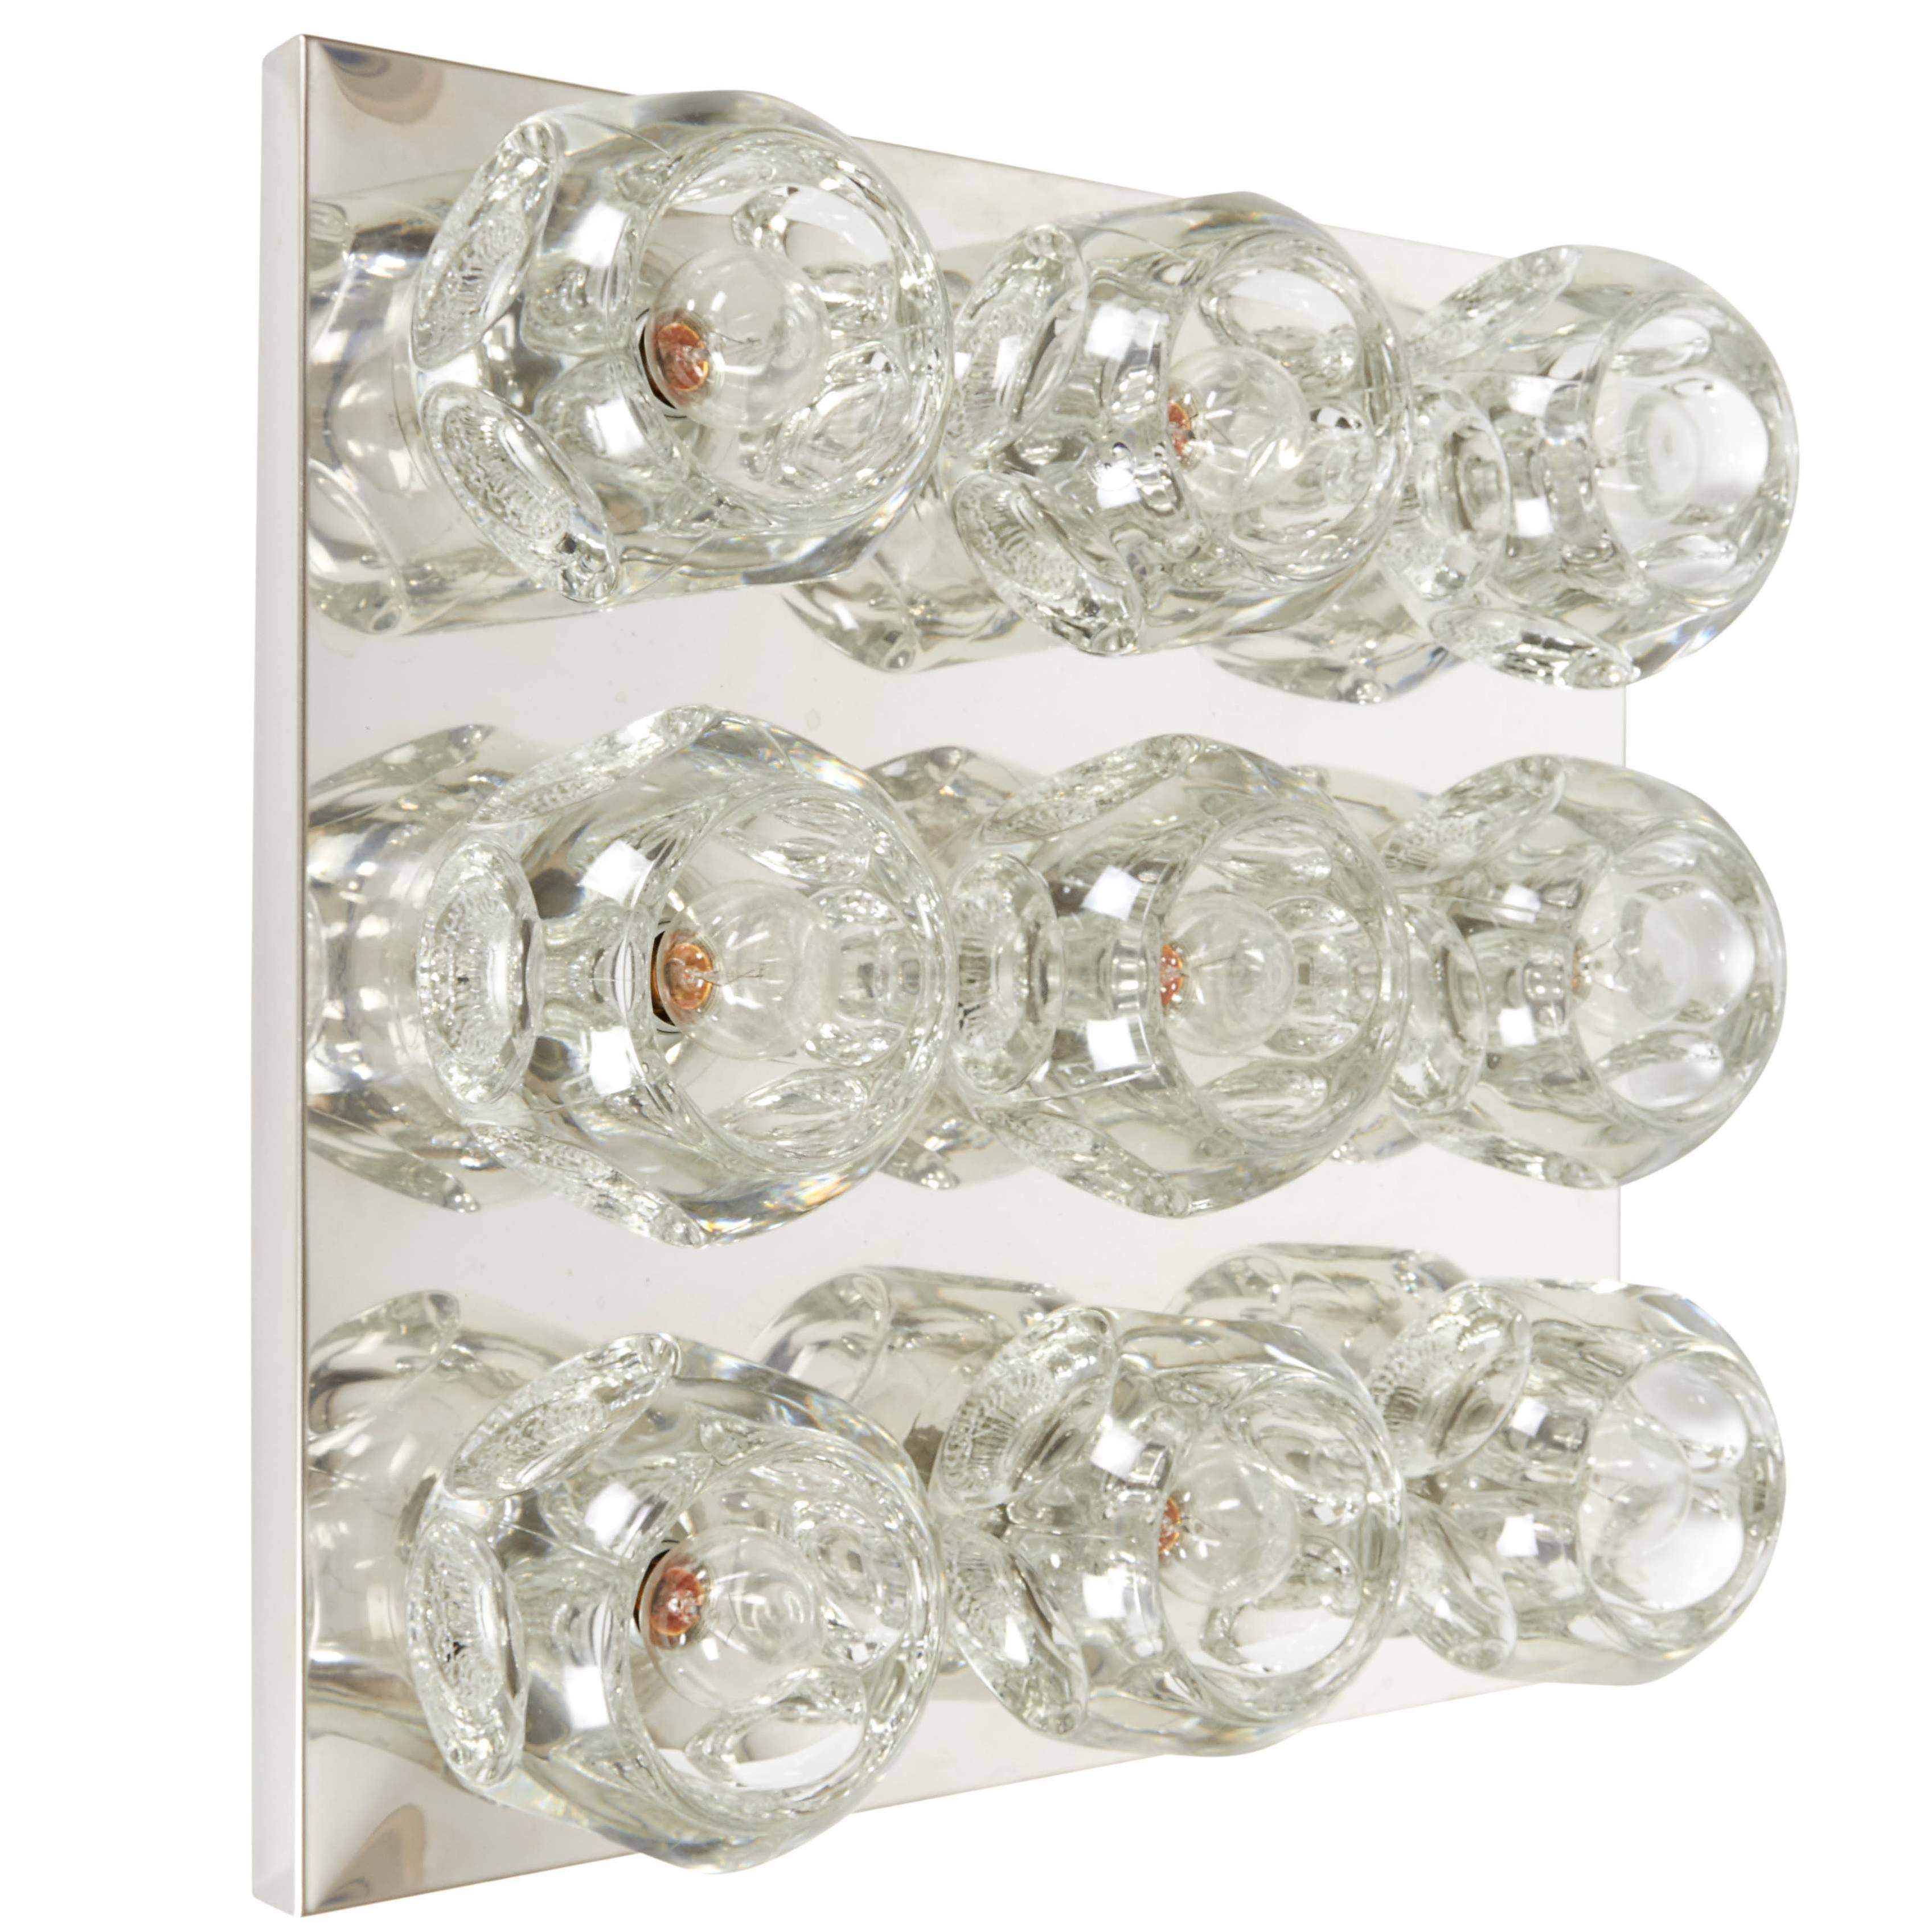 Peill & Putzler Wall and Ceiling Light Fixture in Chrome with Faceted Glass